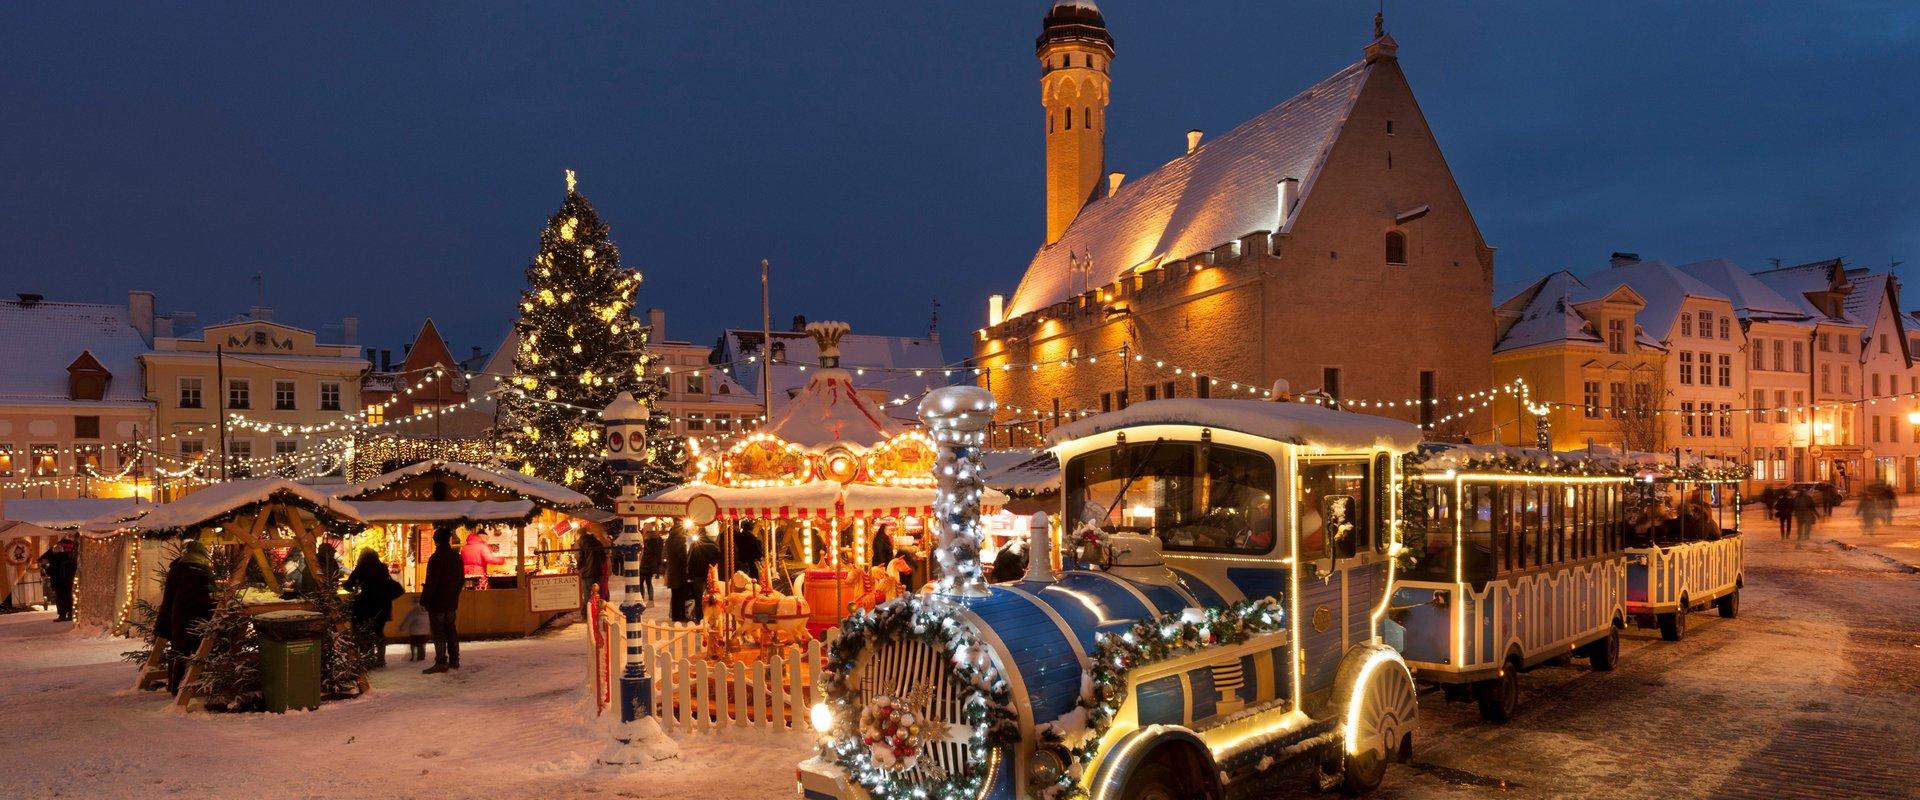 Tallinn Christmas Market with a touch of a fairy tale will be held at the Town Hall Square of Tallinn. Everything is possible at the Christmas Market!